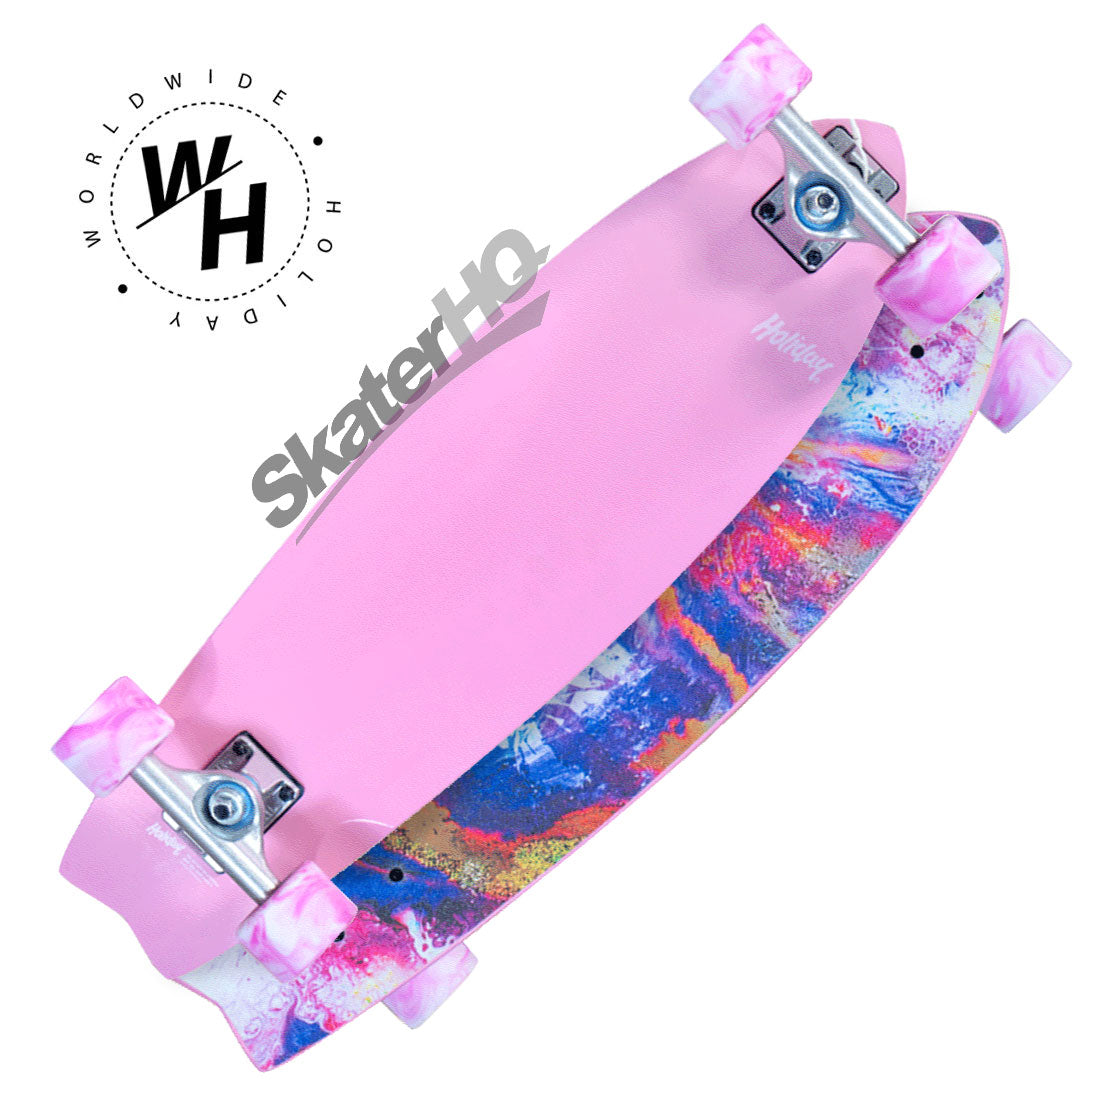 Holiday Cosmic Crush 28 Cruiser Complete - Pink Skateboard Compl Cruisers